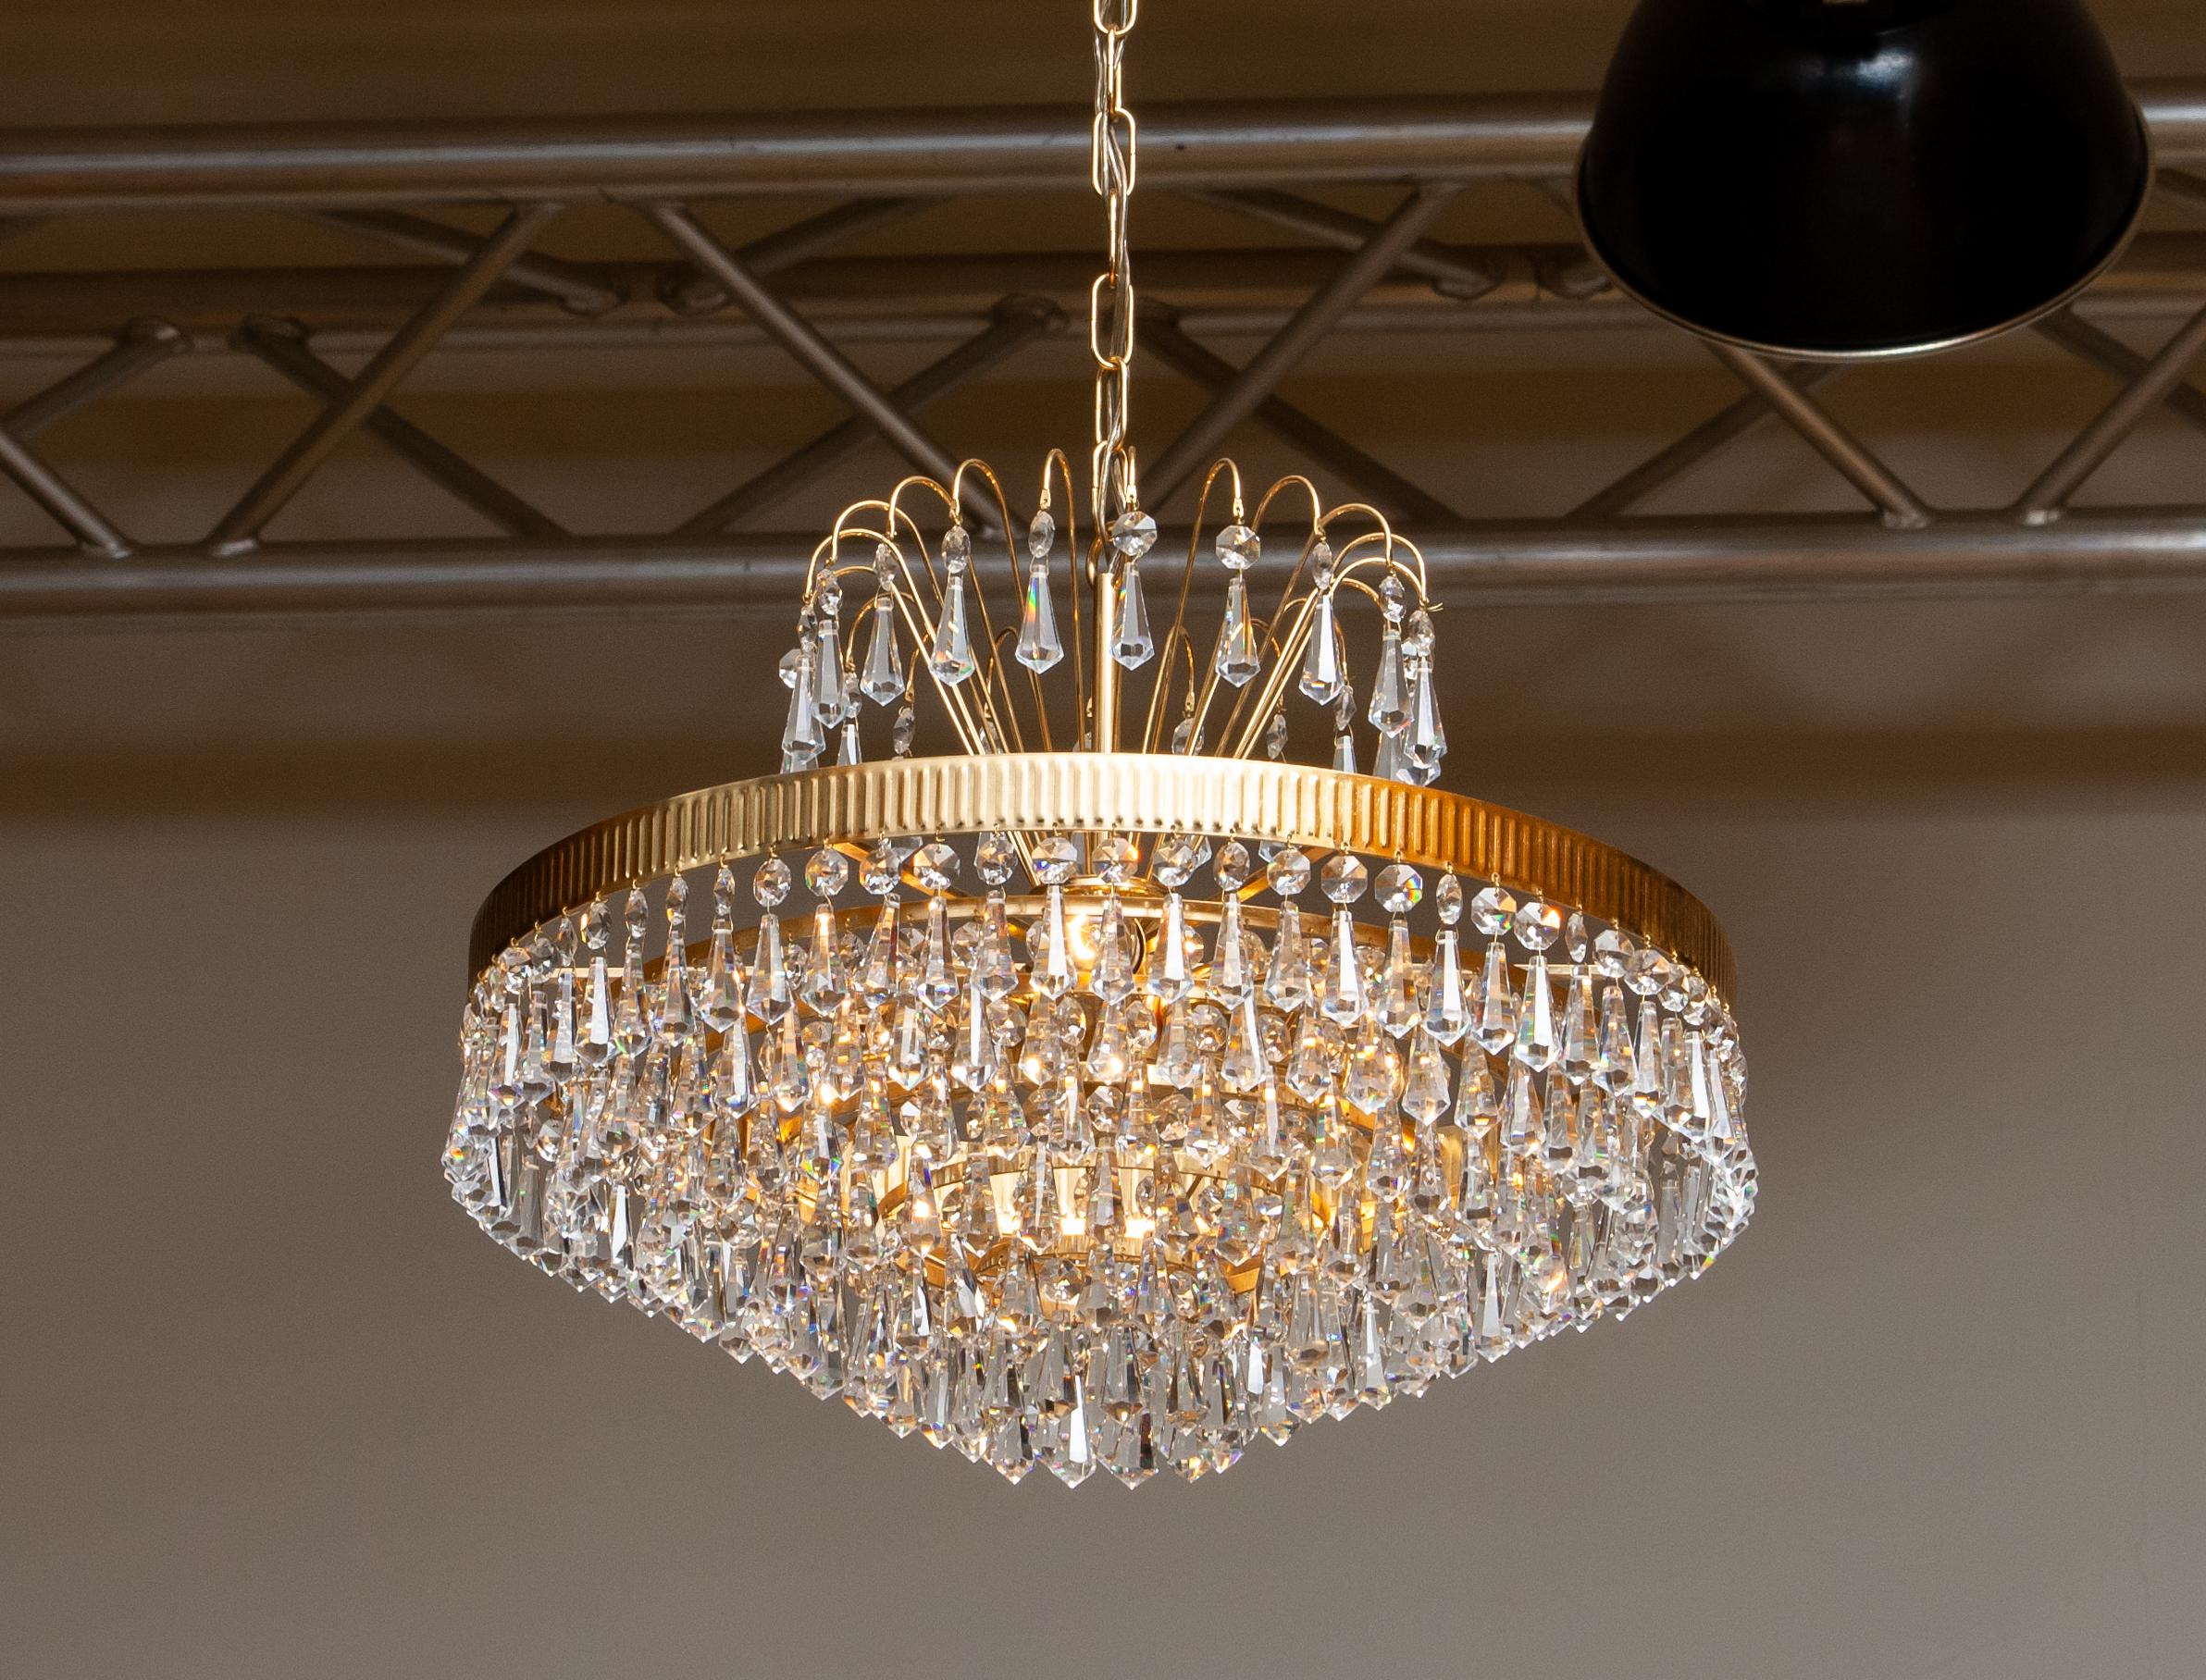 Neoclassical Revival 1960s, 24-Carat Gold-Plated and Faceted Crystal Chandelier by Rejmyre, Sweden